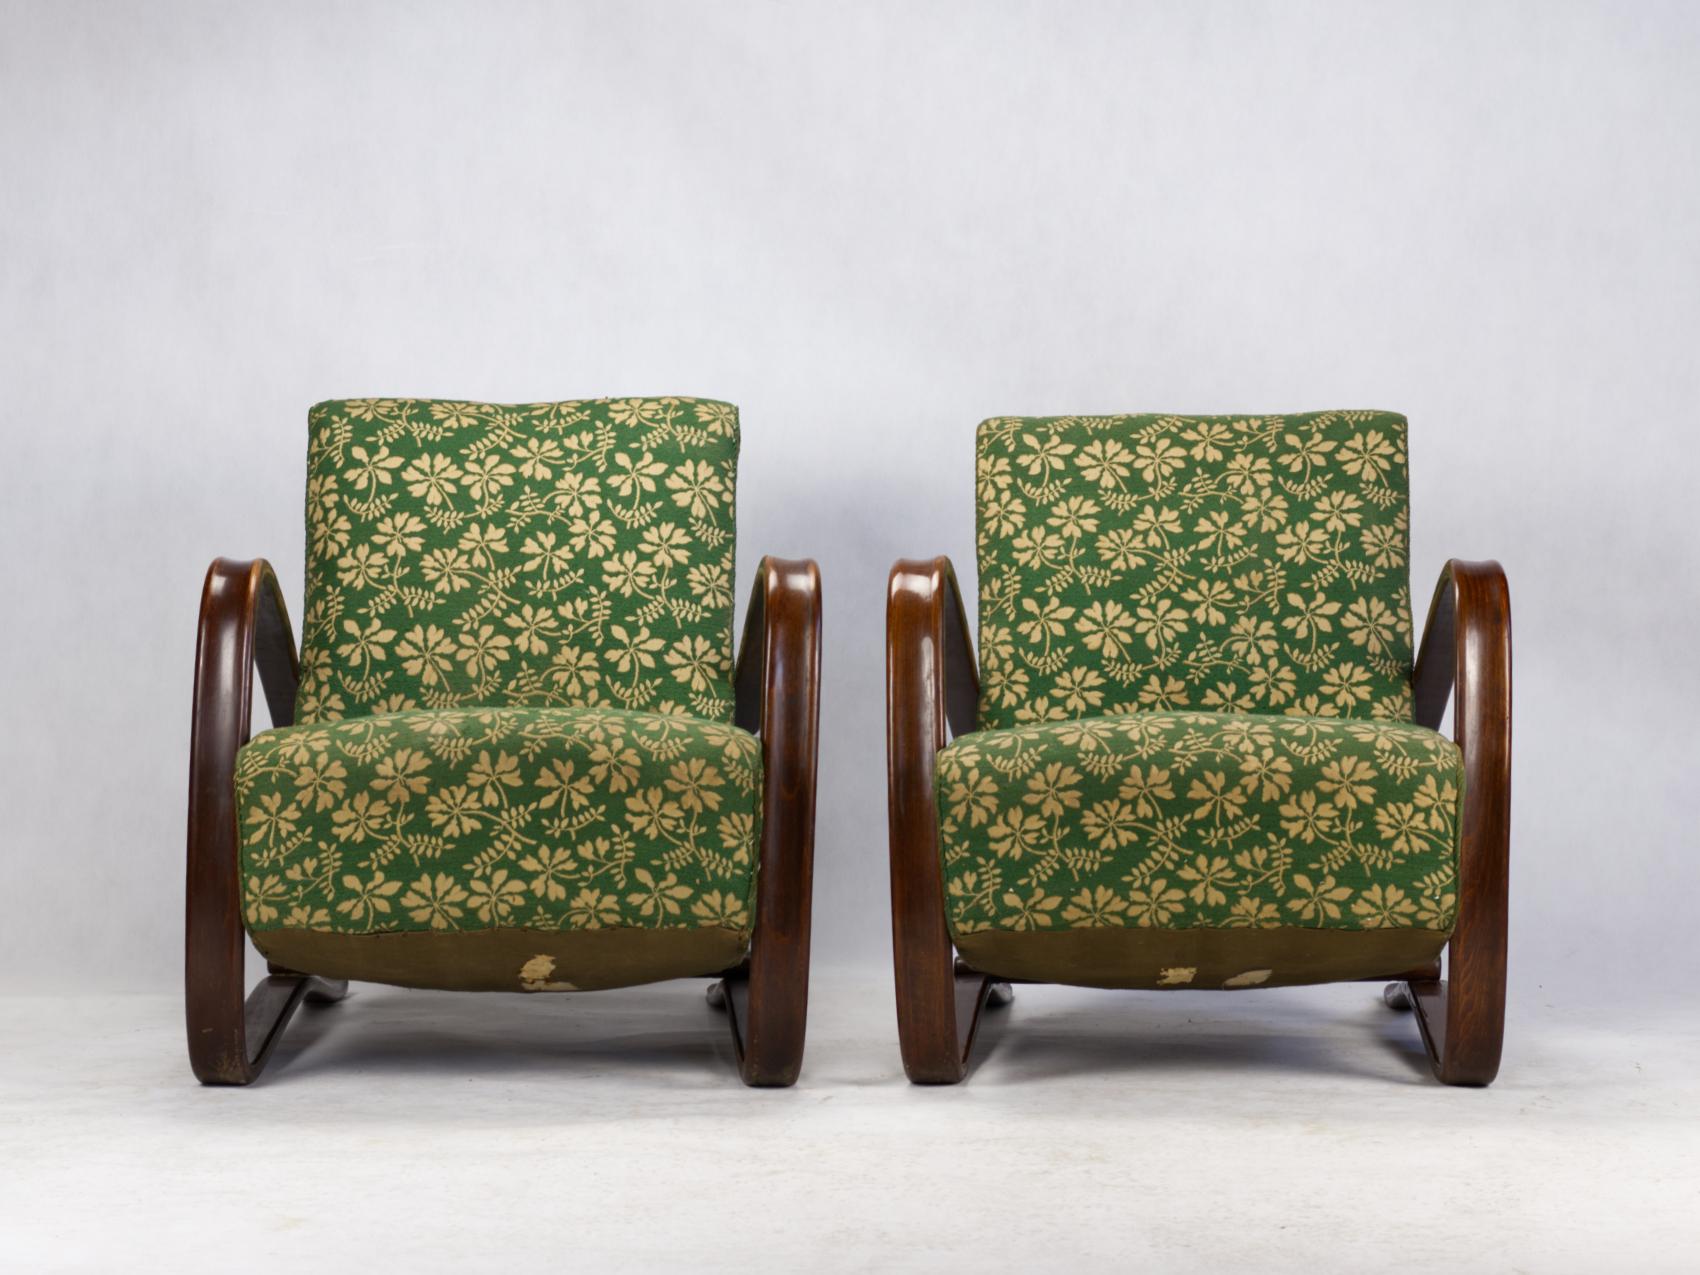 Czech Pair of H269 Lounge Chairs by Jindřich Halabala for Up Závody Brno, 1930s